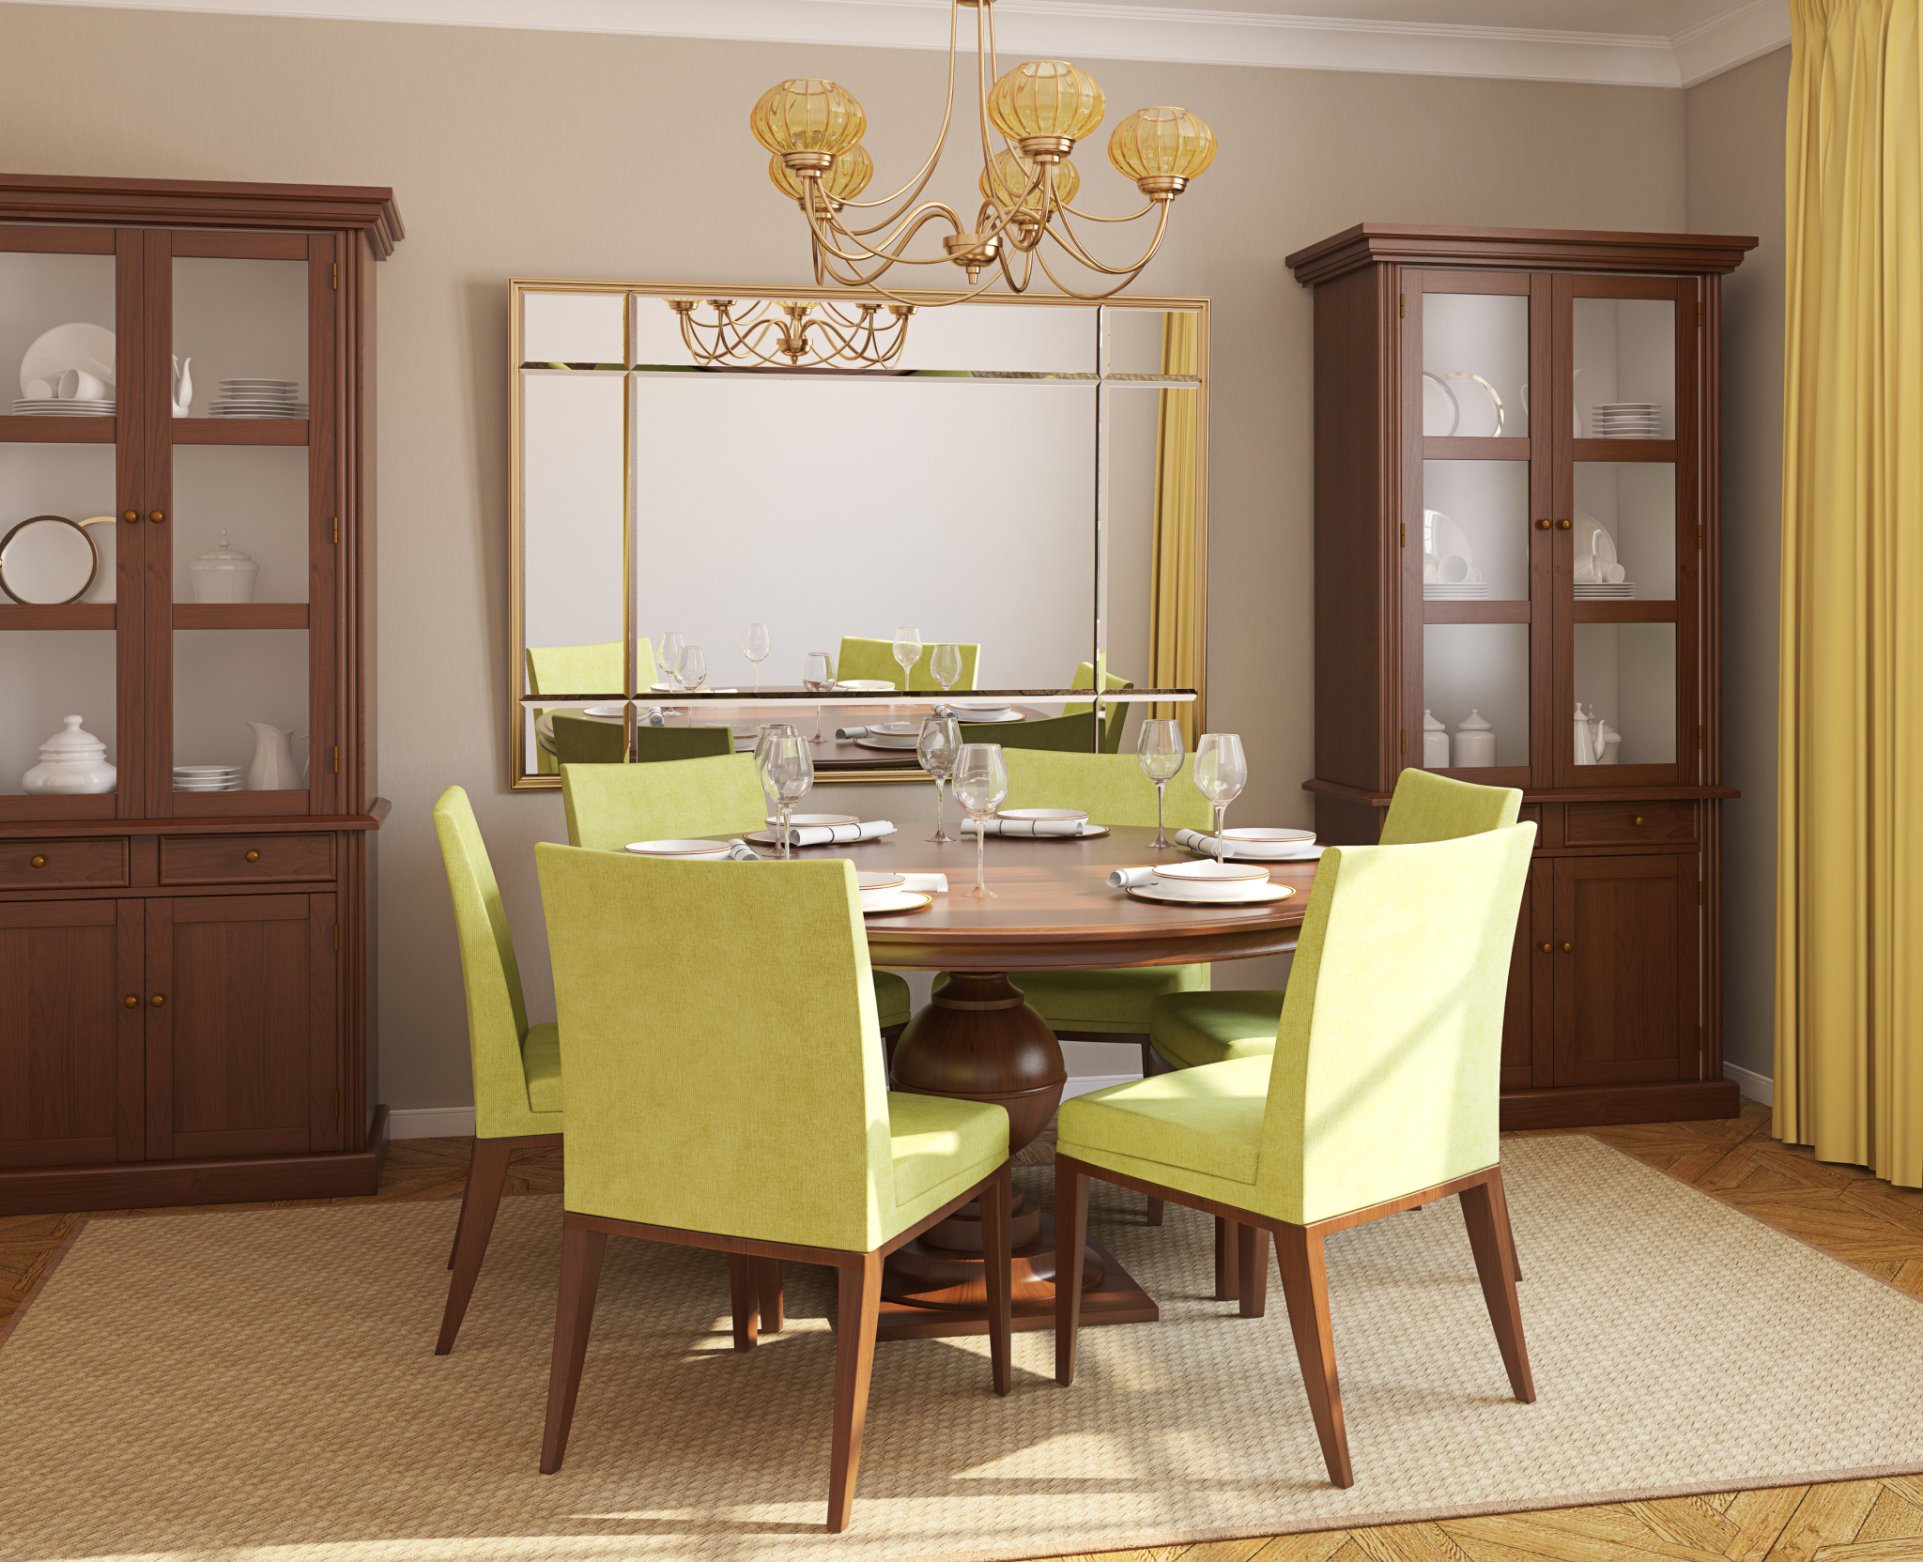 A Dining Room Buffet Hutch Display Ideas Guide